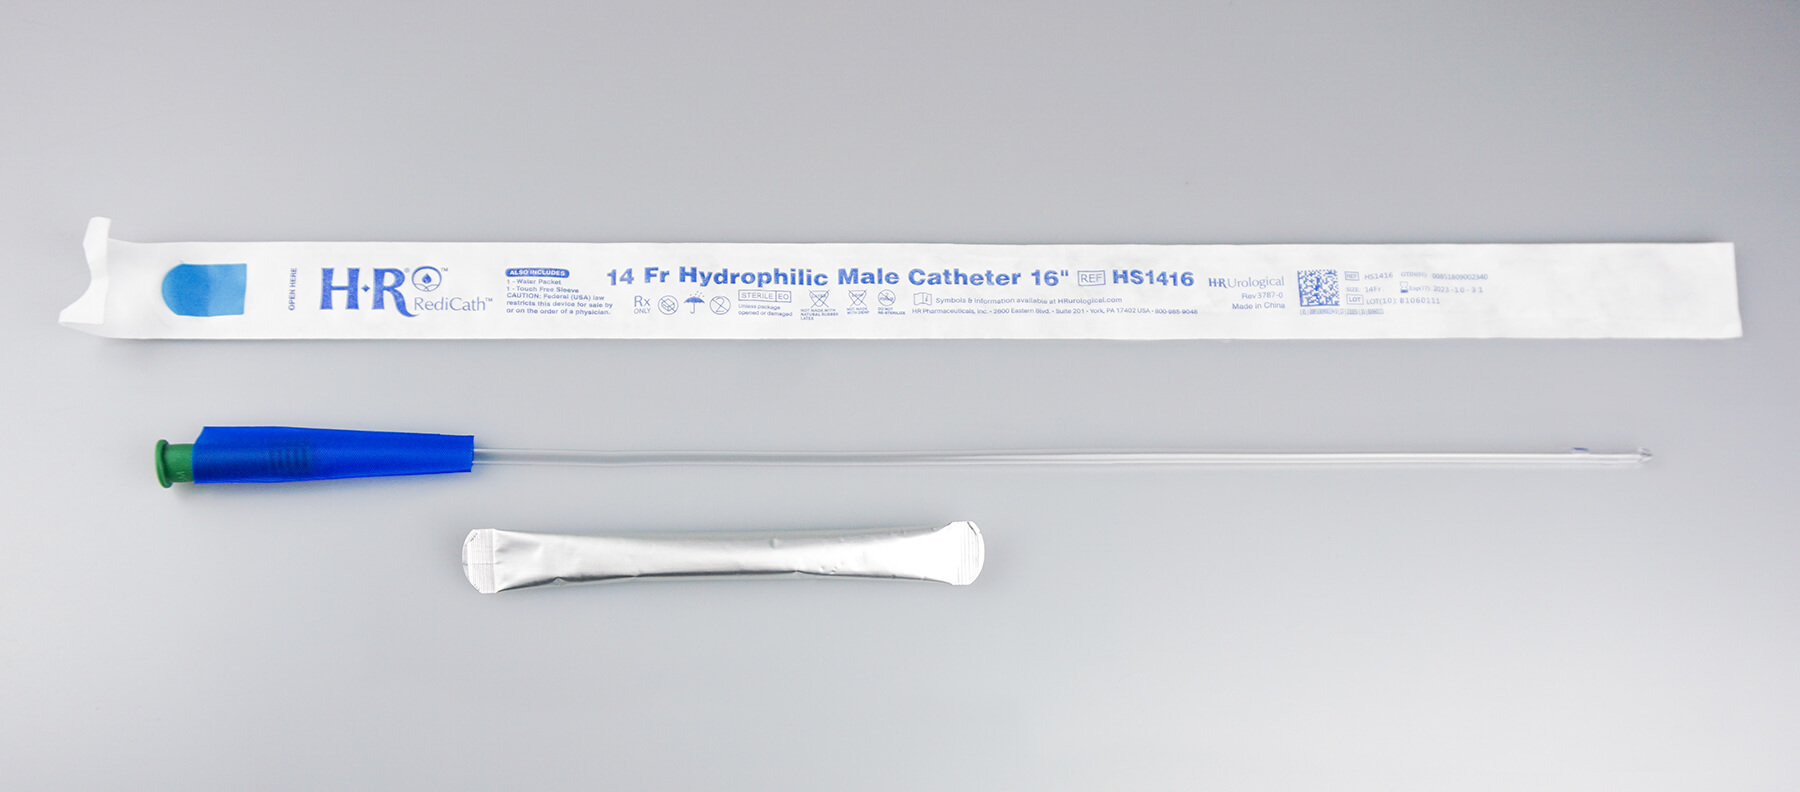 TruCath Hydrophilic Catheter - HS146 pictured with water pouch